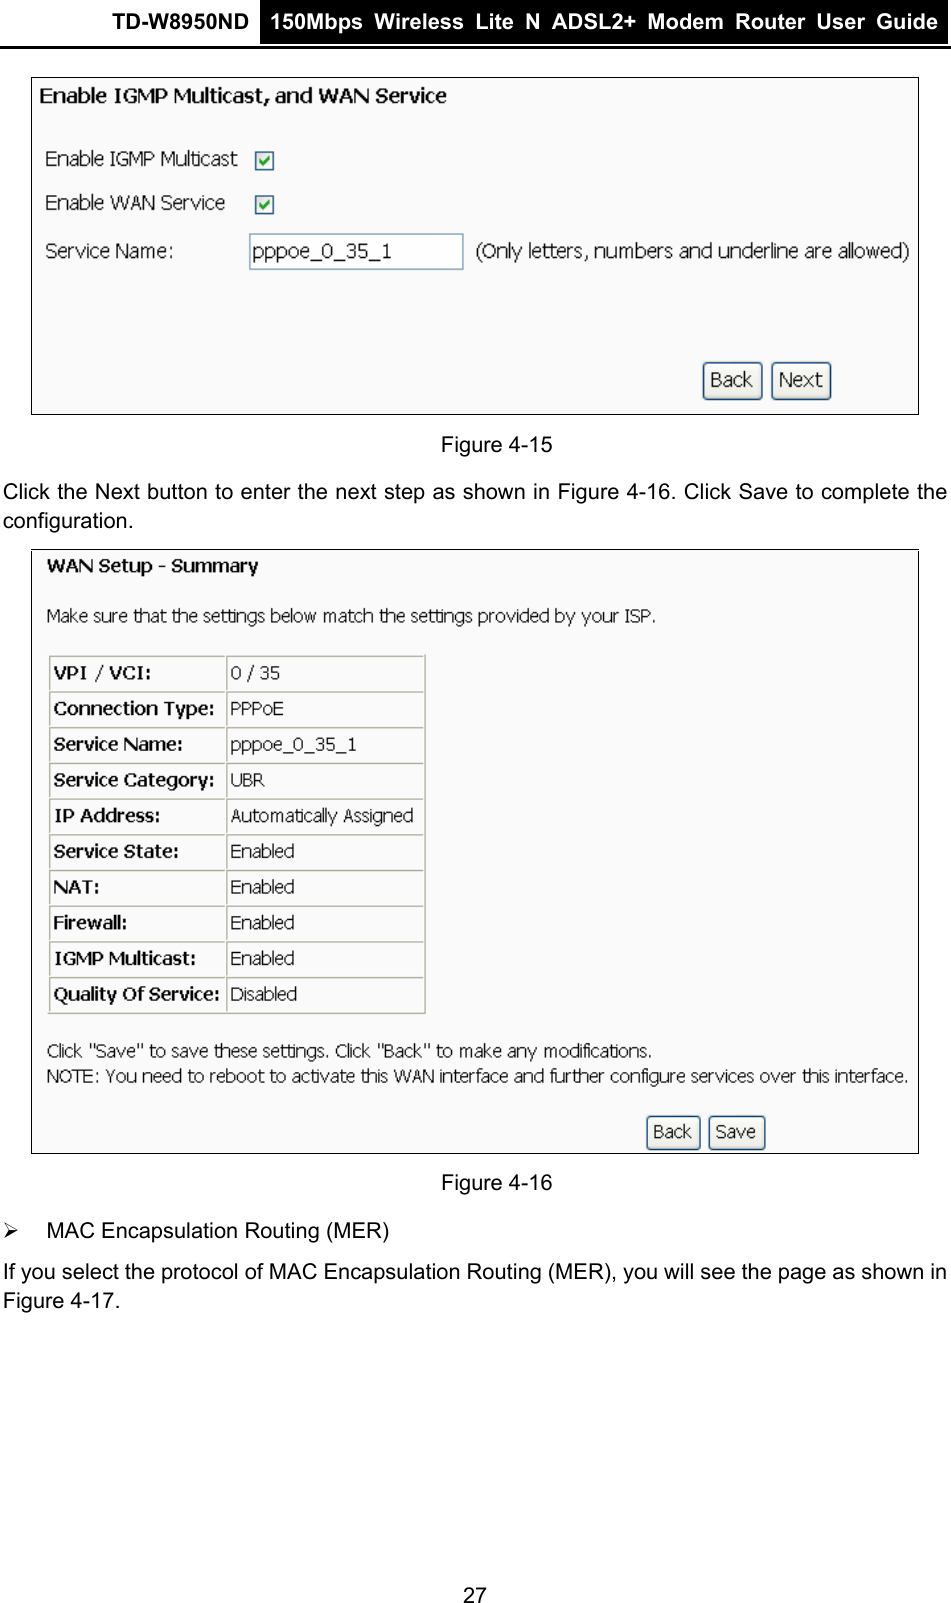 TD-W8950ND  150Mbps Wireless Lite N ADSL2+ Modem Router User Guide   Figure 4-15 Click the Next button to enter the next step as shown in Figure 4-16. Click Save to complete the configuration.  Figure 4-16 ¾  MAC Encapsulation Routing (MER) If you select the protocol of MAC Encapsulation Routing (MER), you will see the page as shown in Figure 4-17. 27 